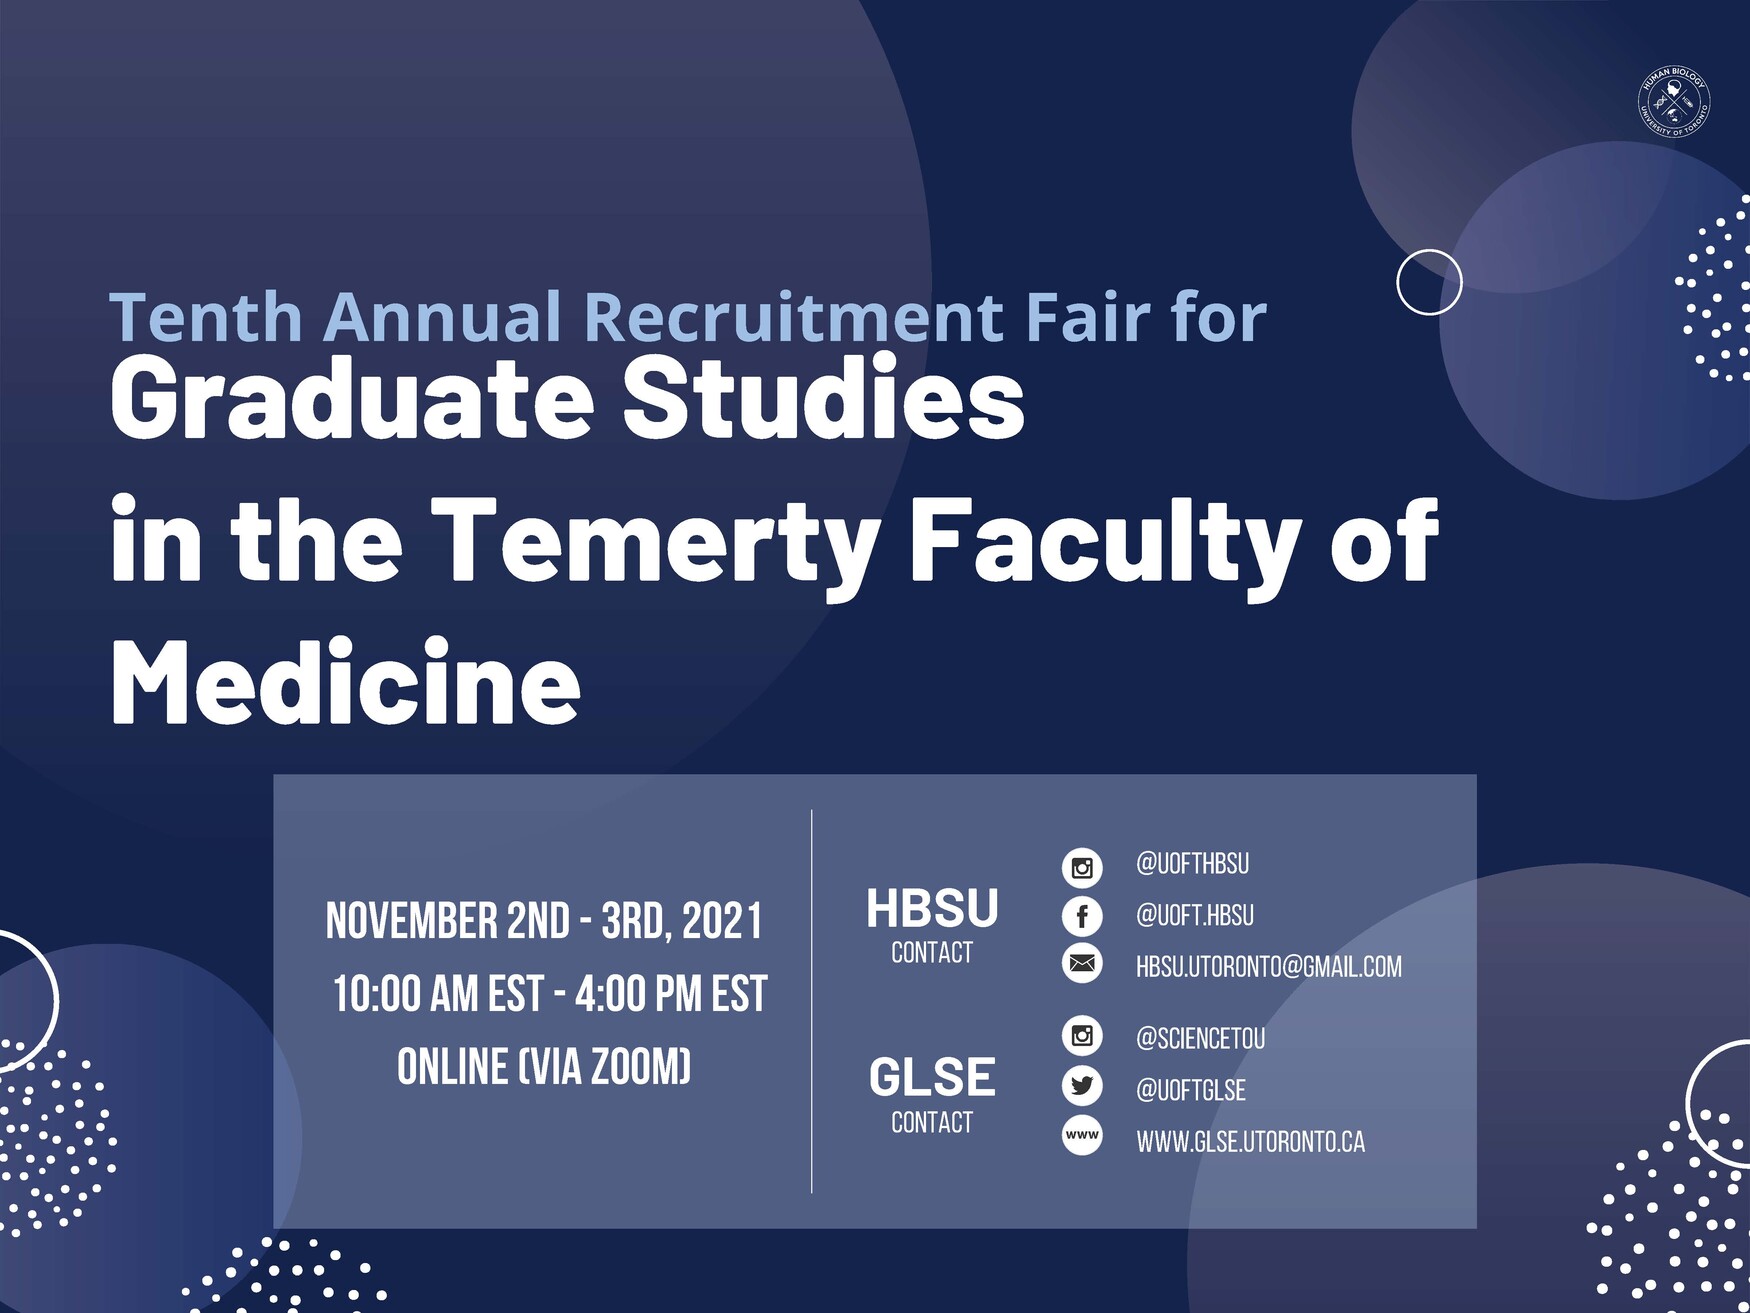 Tenth Annual Recruitment Fair for Graduate Studies in the Temerty Faculty of Medicine